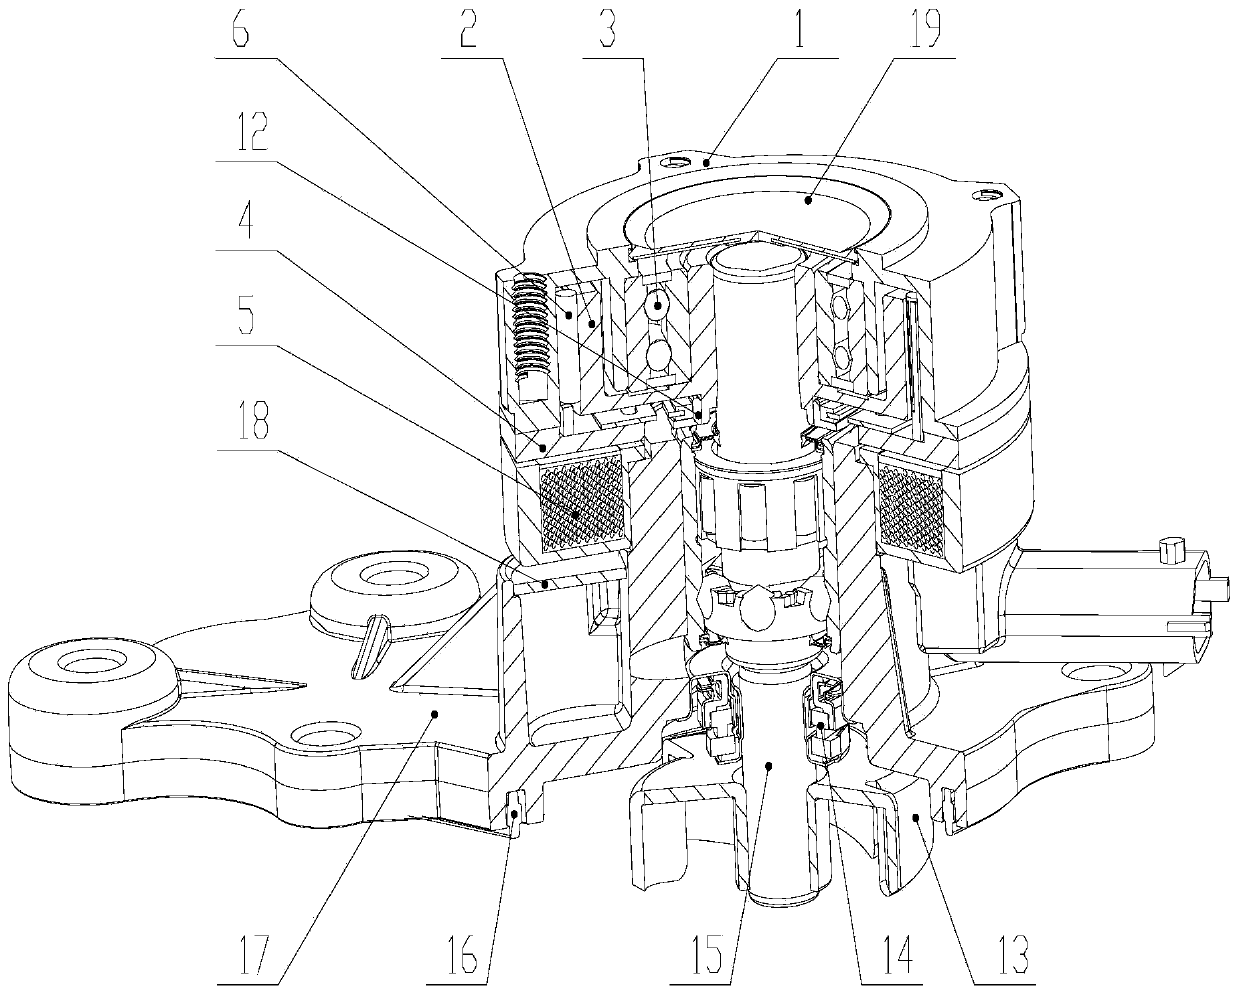 Electromagnetic clutch and clutch assembly